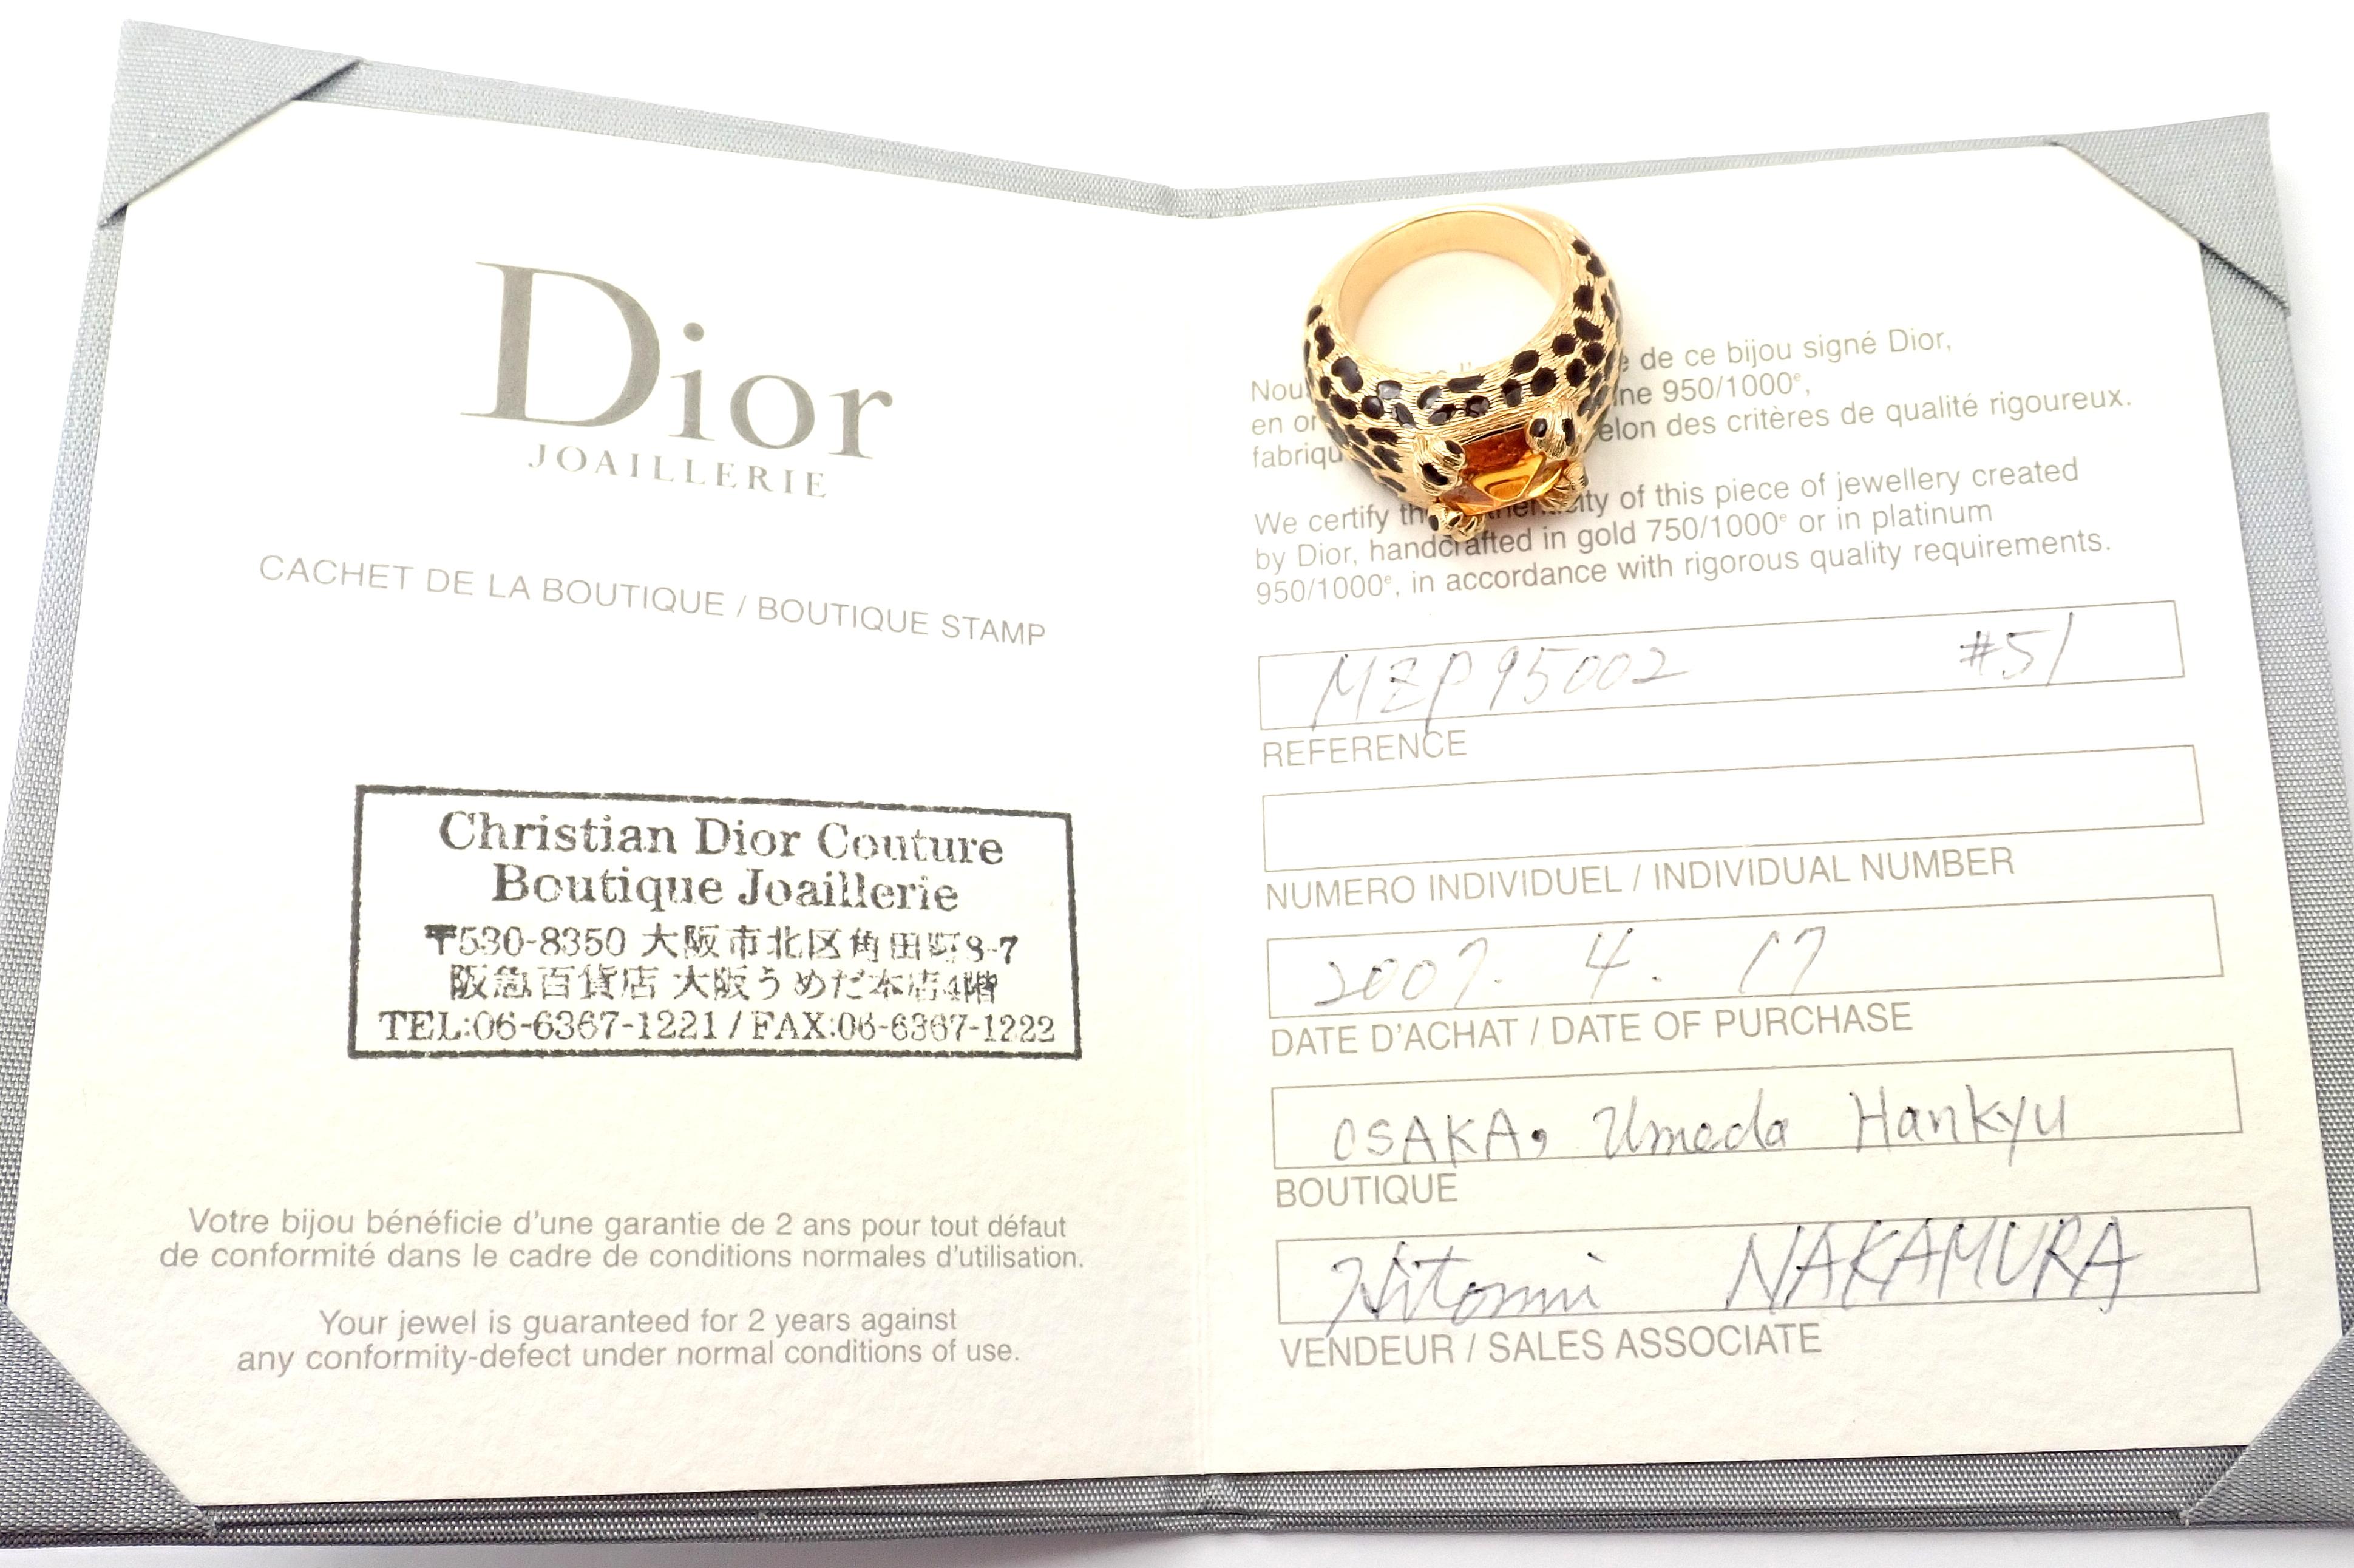 Christian Dior Leopard Citrine and Enamel Yellow Gold Ring In Excellent Condition For Sale In Holland, PA